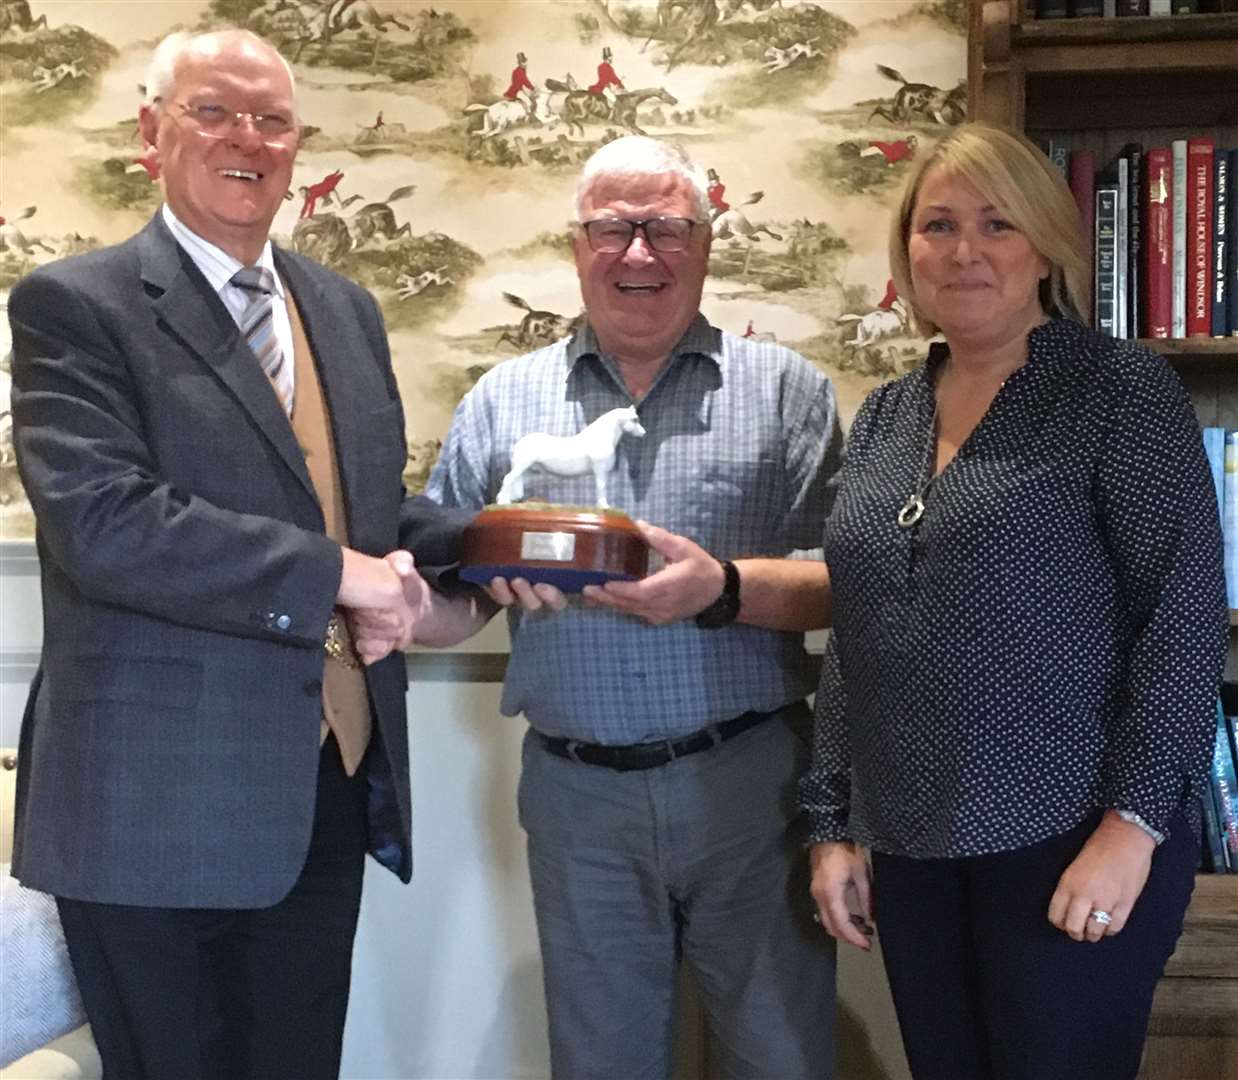 Wick man David Munro receiving the Bambi trophy – the local Riding for the Disabled Association volunteers' award – from Jimmy Johnston, while looking on is Caithness RDA chairperson Judith Miller. The Bambi trophy was presented to the group by Elizabeth Gunn, one of the founding members.